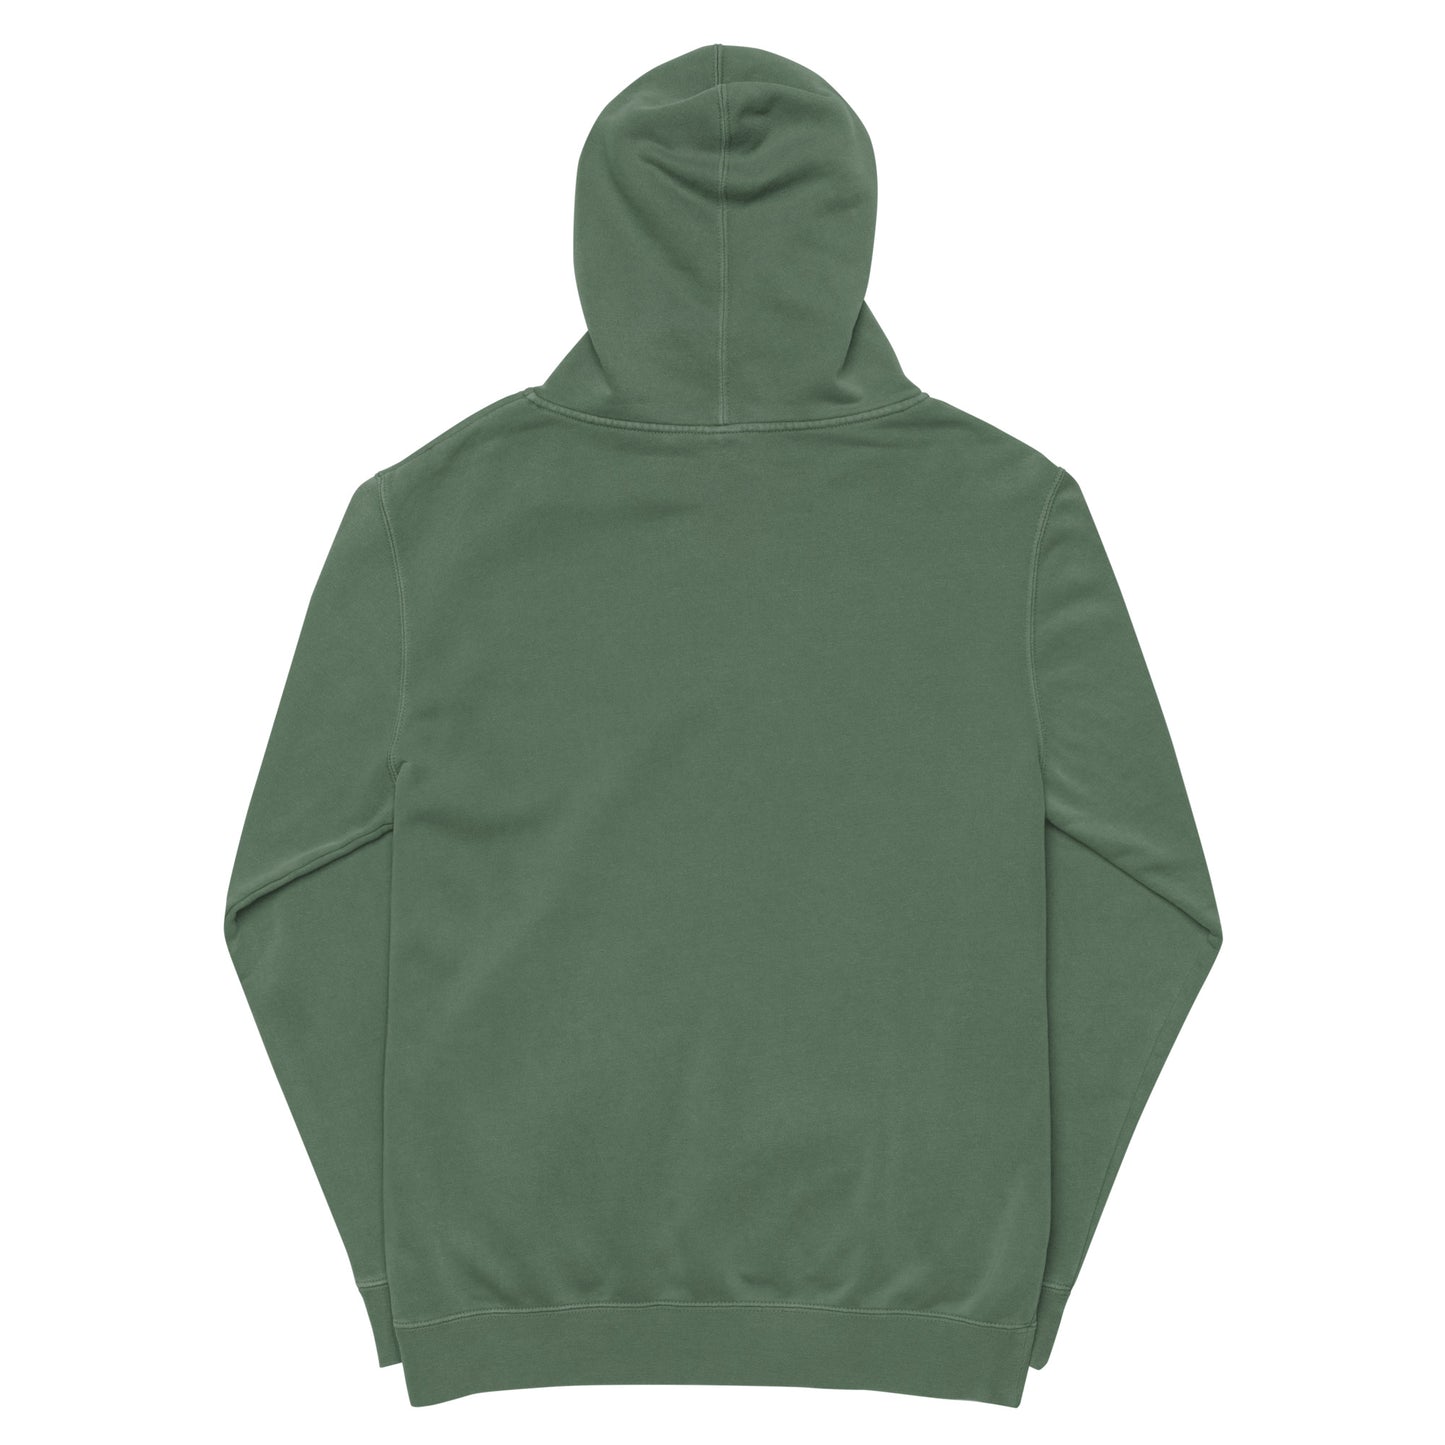 Common Ground Oversized Pigment Dyed Hoodie